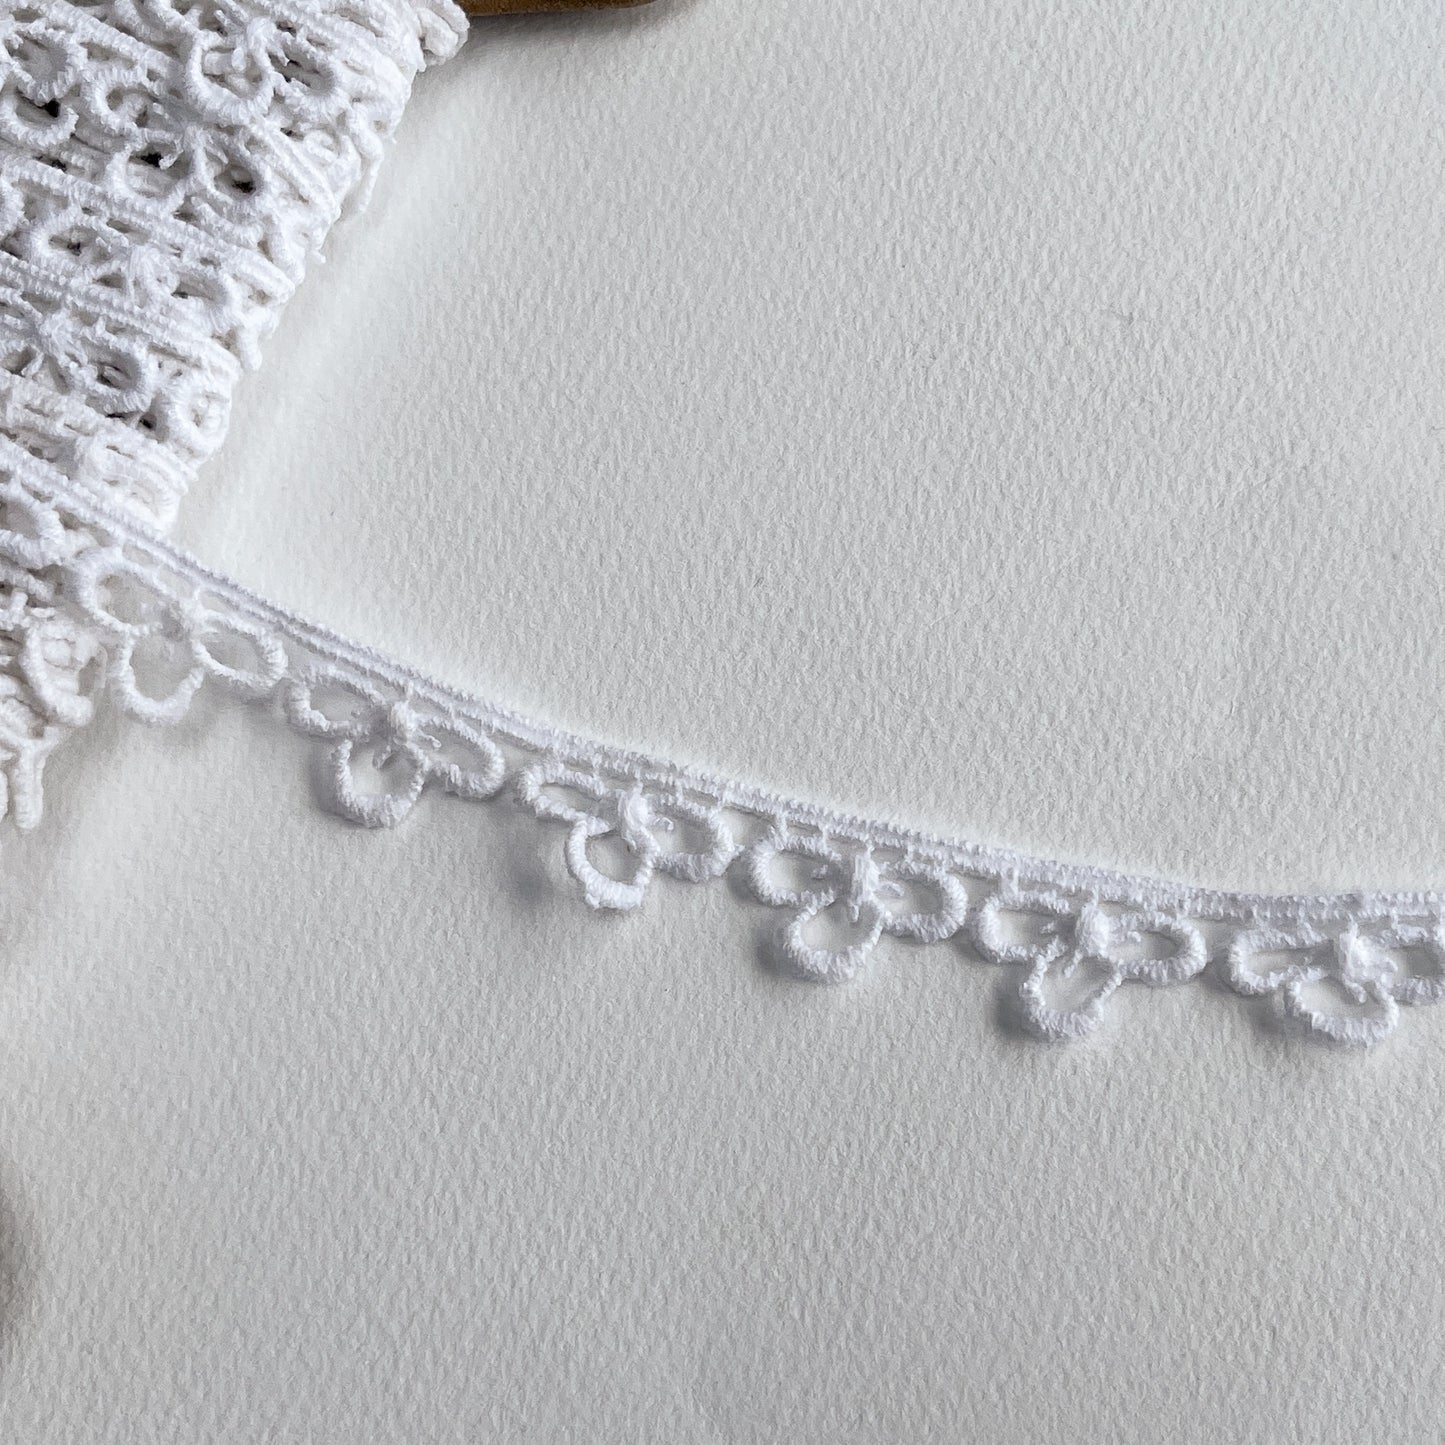 Vintage Trefoil Cotton guipure lace trim  with a matt finish, we believe to be from the 1980s